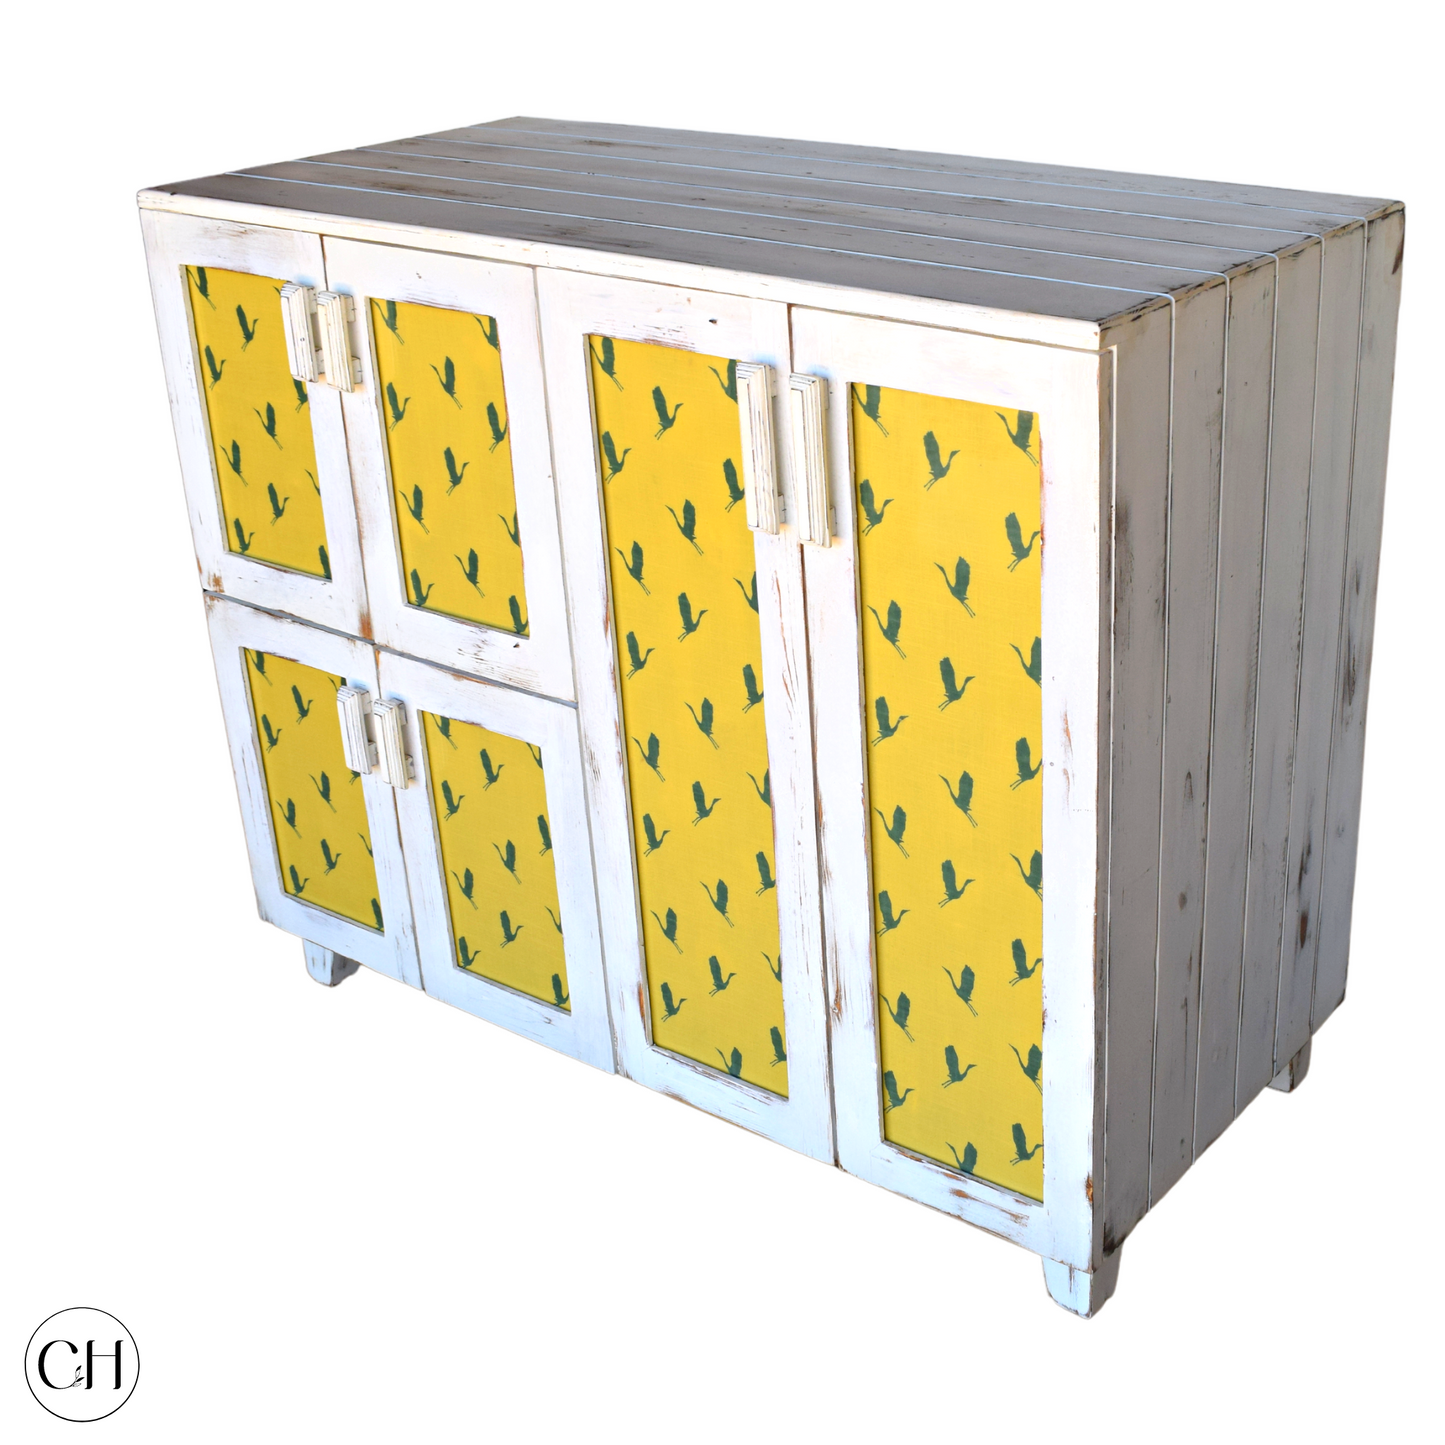 Flamingo - Multipurpose Wooden Storage Cabinet with Fabric-Laminated Doors (top view, white background)